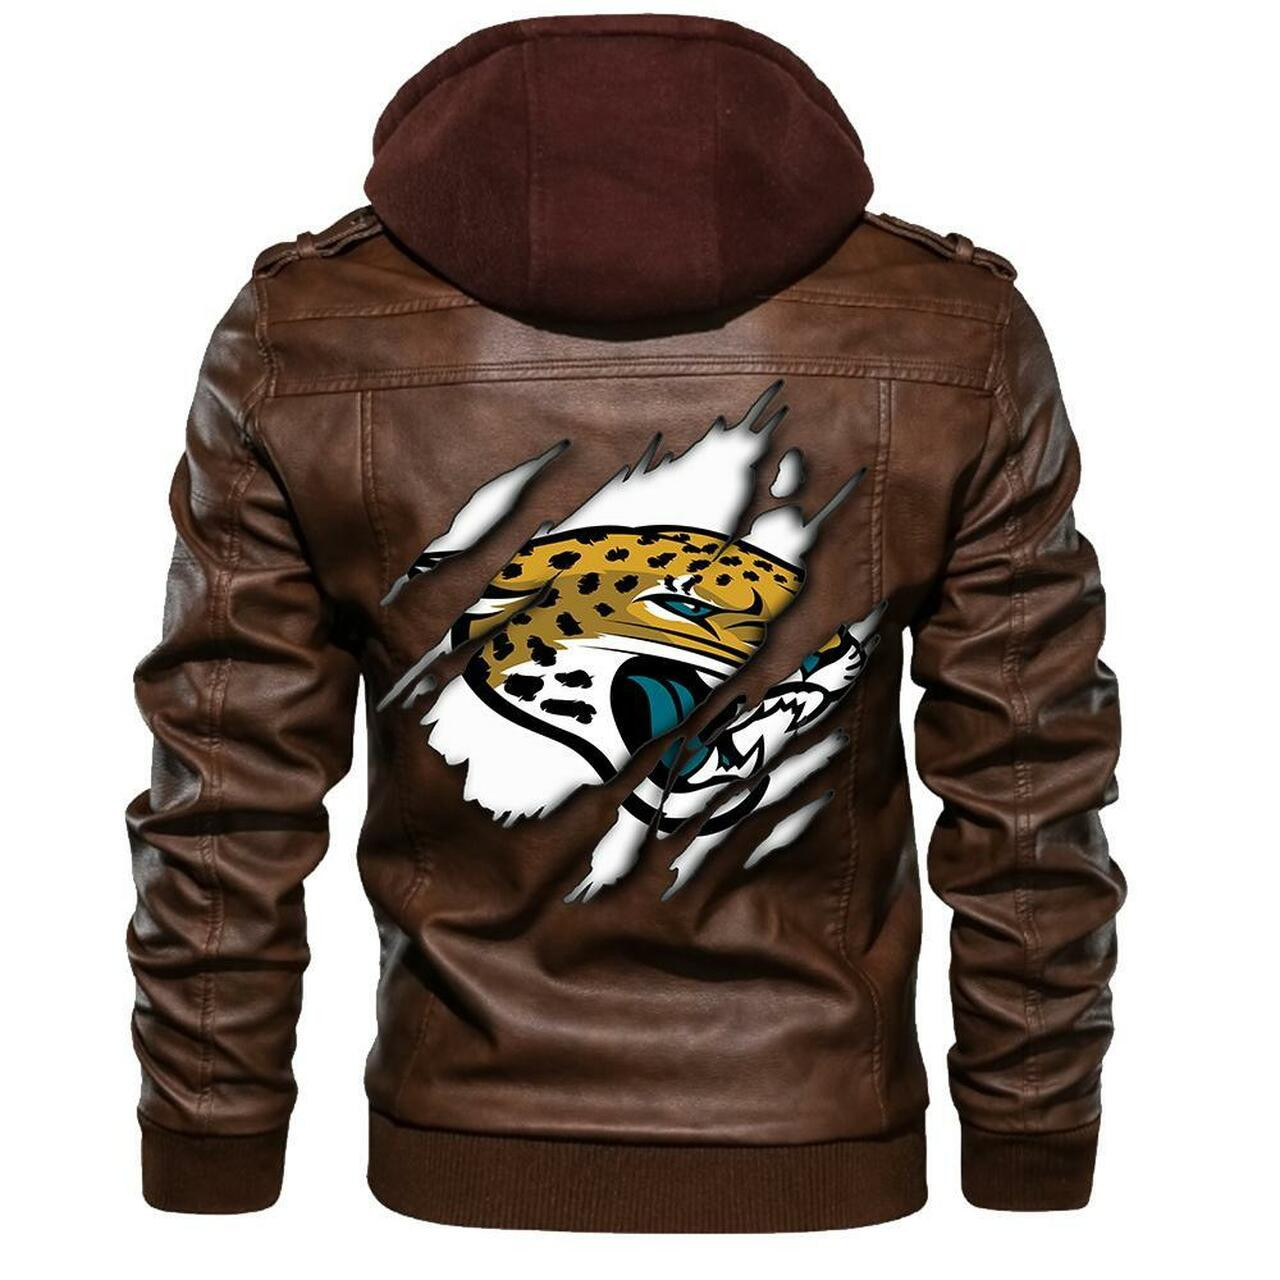 This leather Jacket will look great on you and make you stand out from the crowd 305